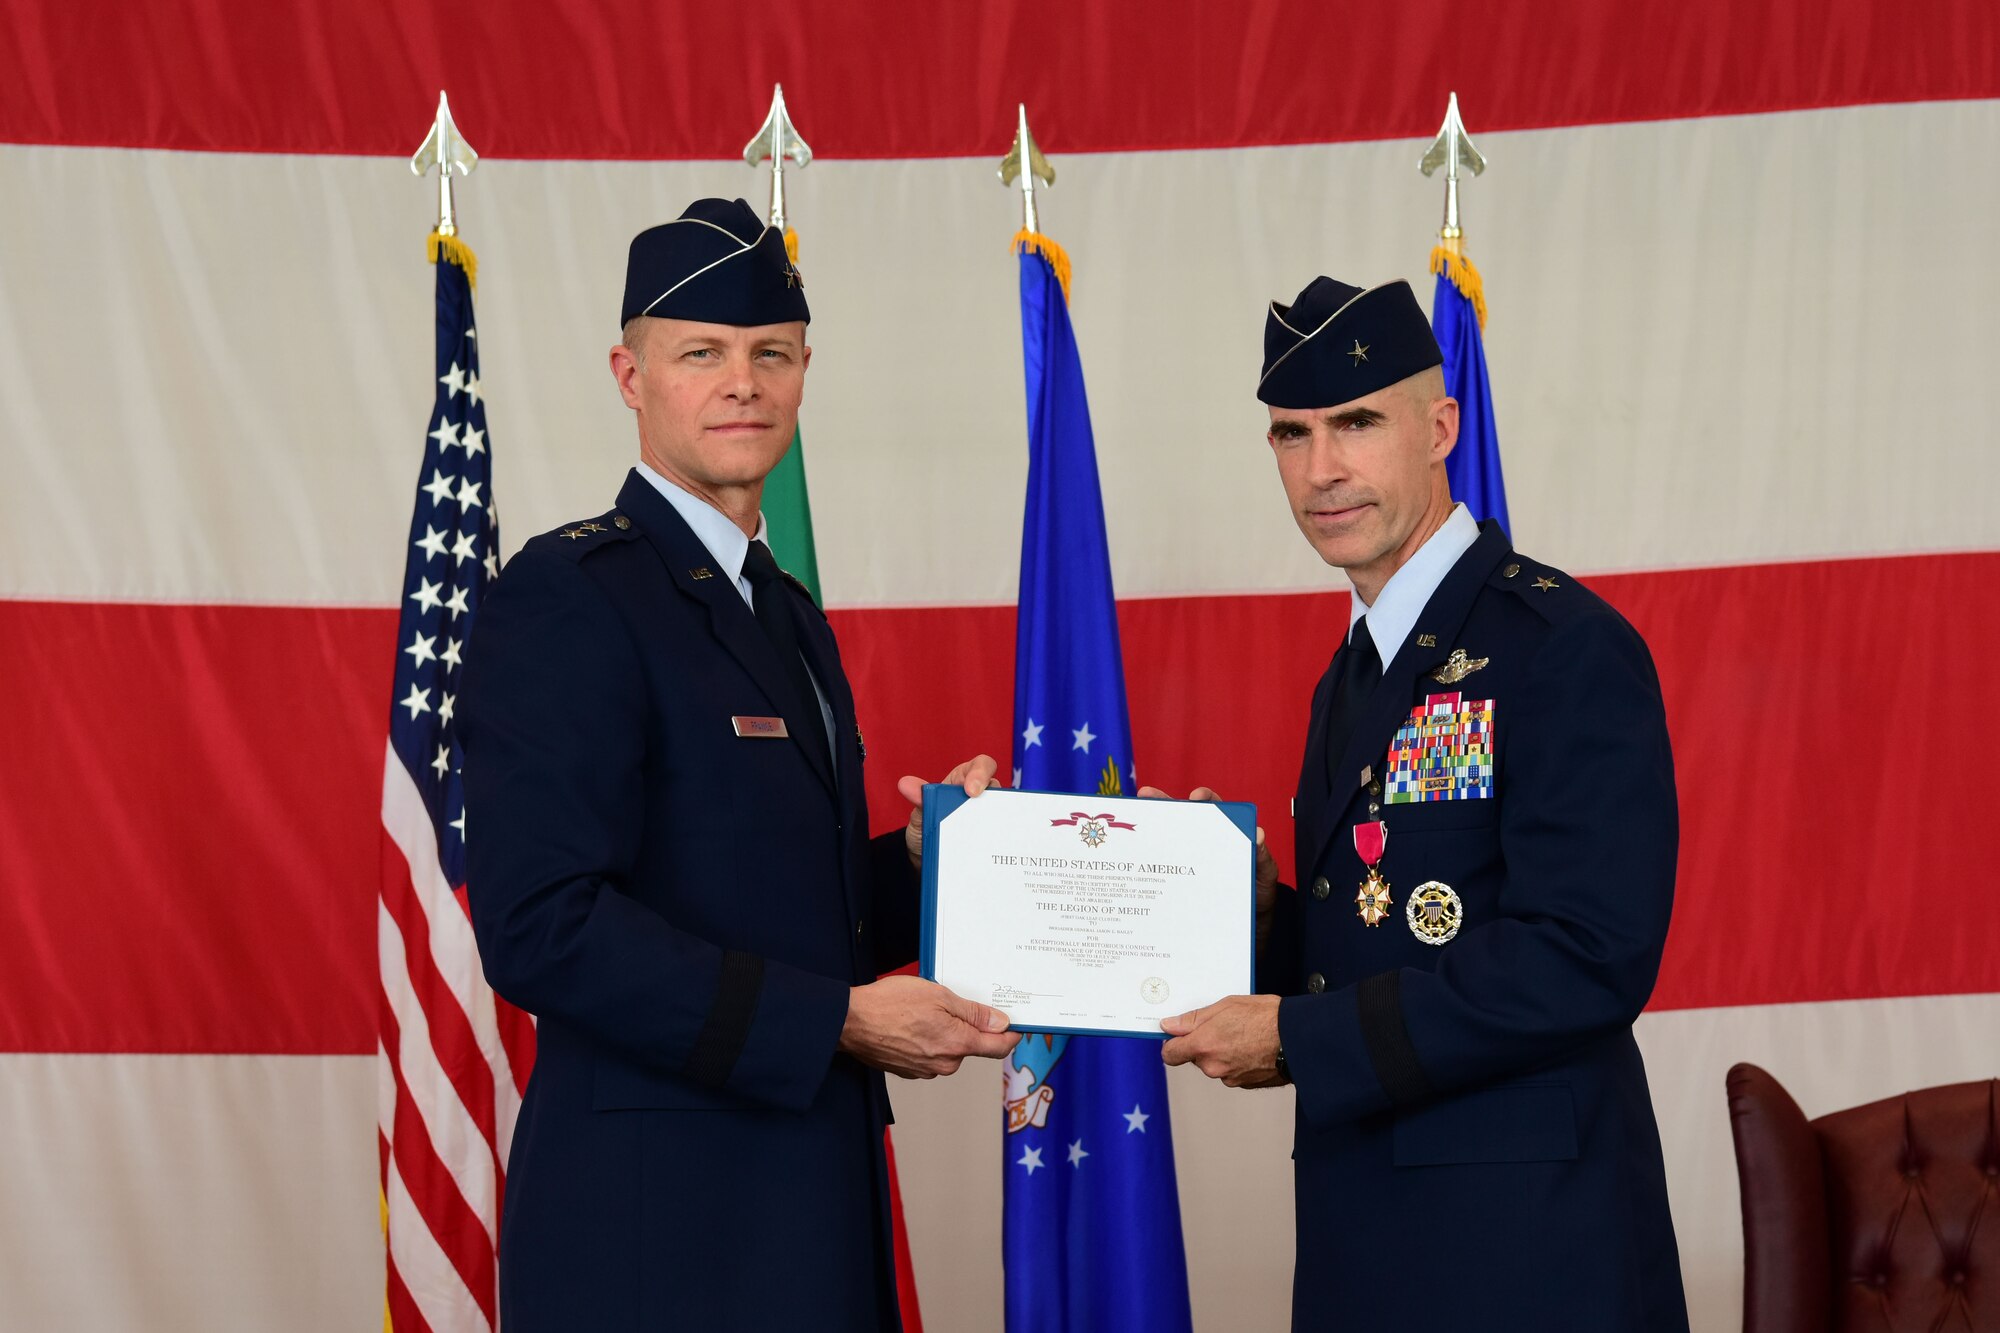 U.S. Air Force Maj. Gen. Derek C. France, 3rd Air Force commander, left, awards the Legion of Merit to Brig. Gen. Jason Bailey, 31st Fighter Wing outgoing commander, right, during the 31st FW change of command ceremony at Aviano Air Base